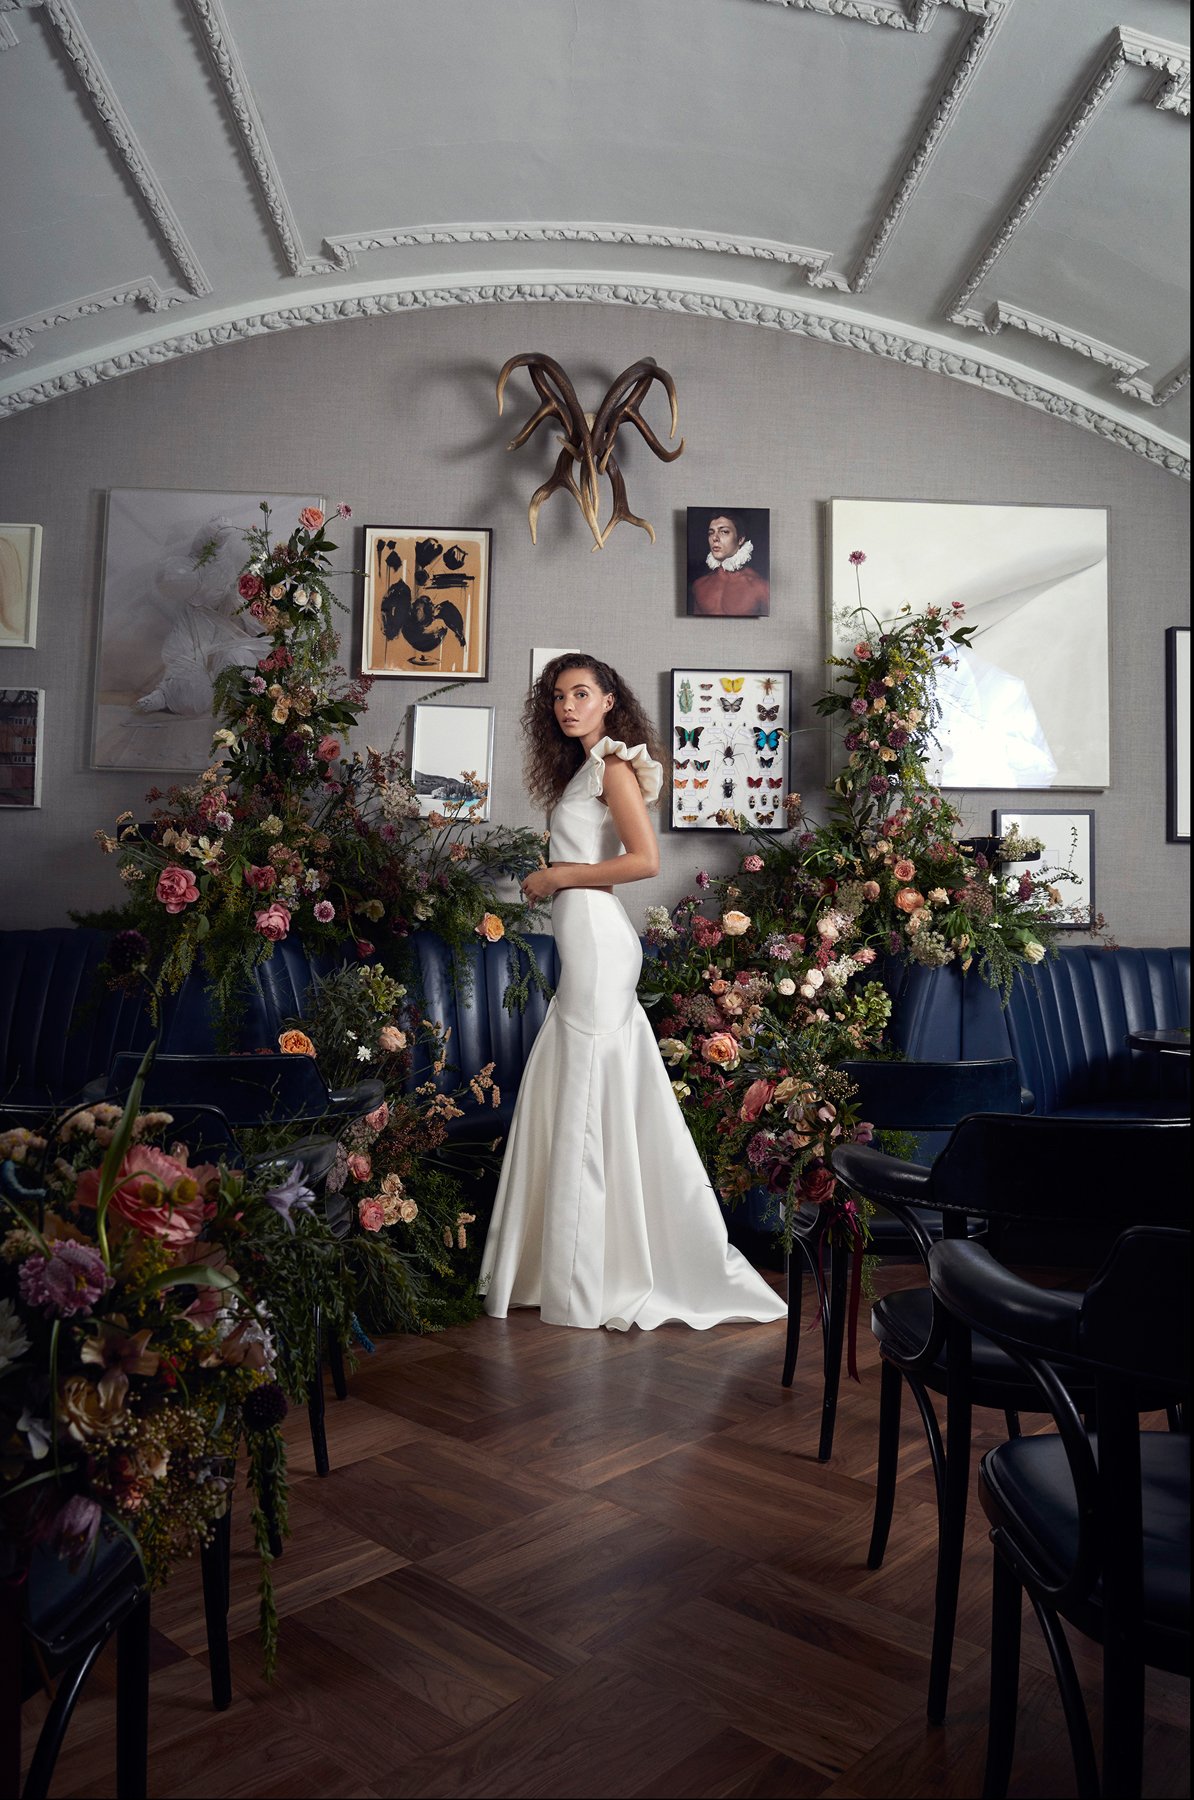 An inspiration shoot at the Groucho Club with Halfpenny London wedding dresses